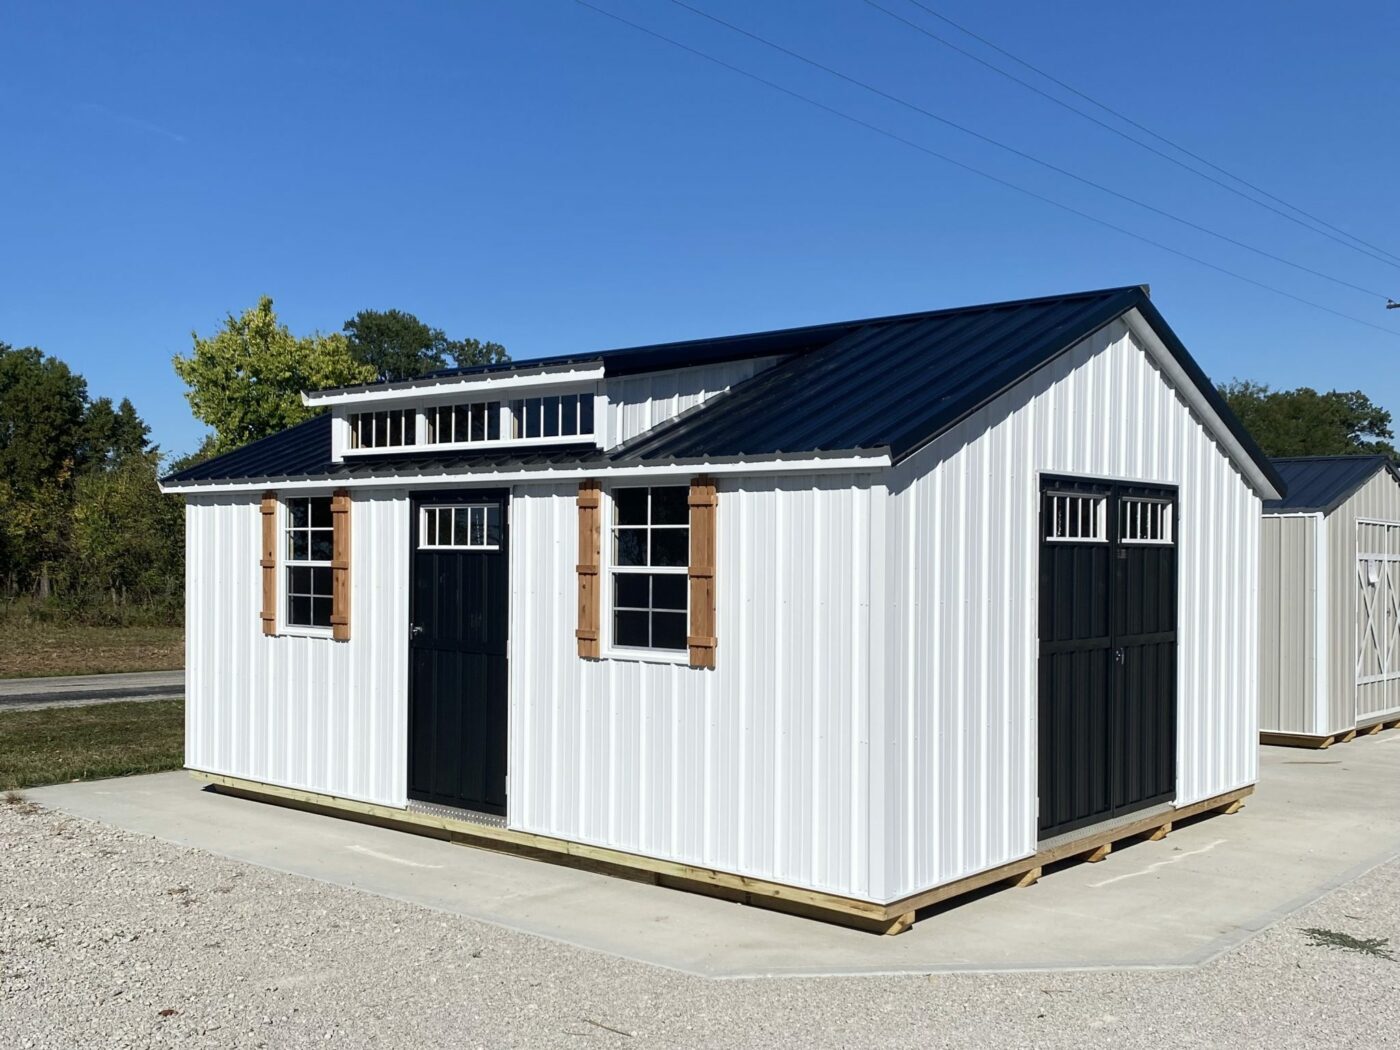 12x20 shed prefab wood buildings for sale in va 300x200 1 edited 2048x1536